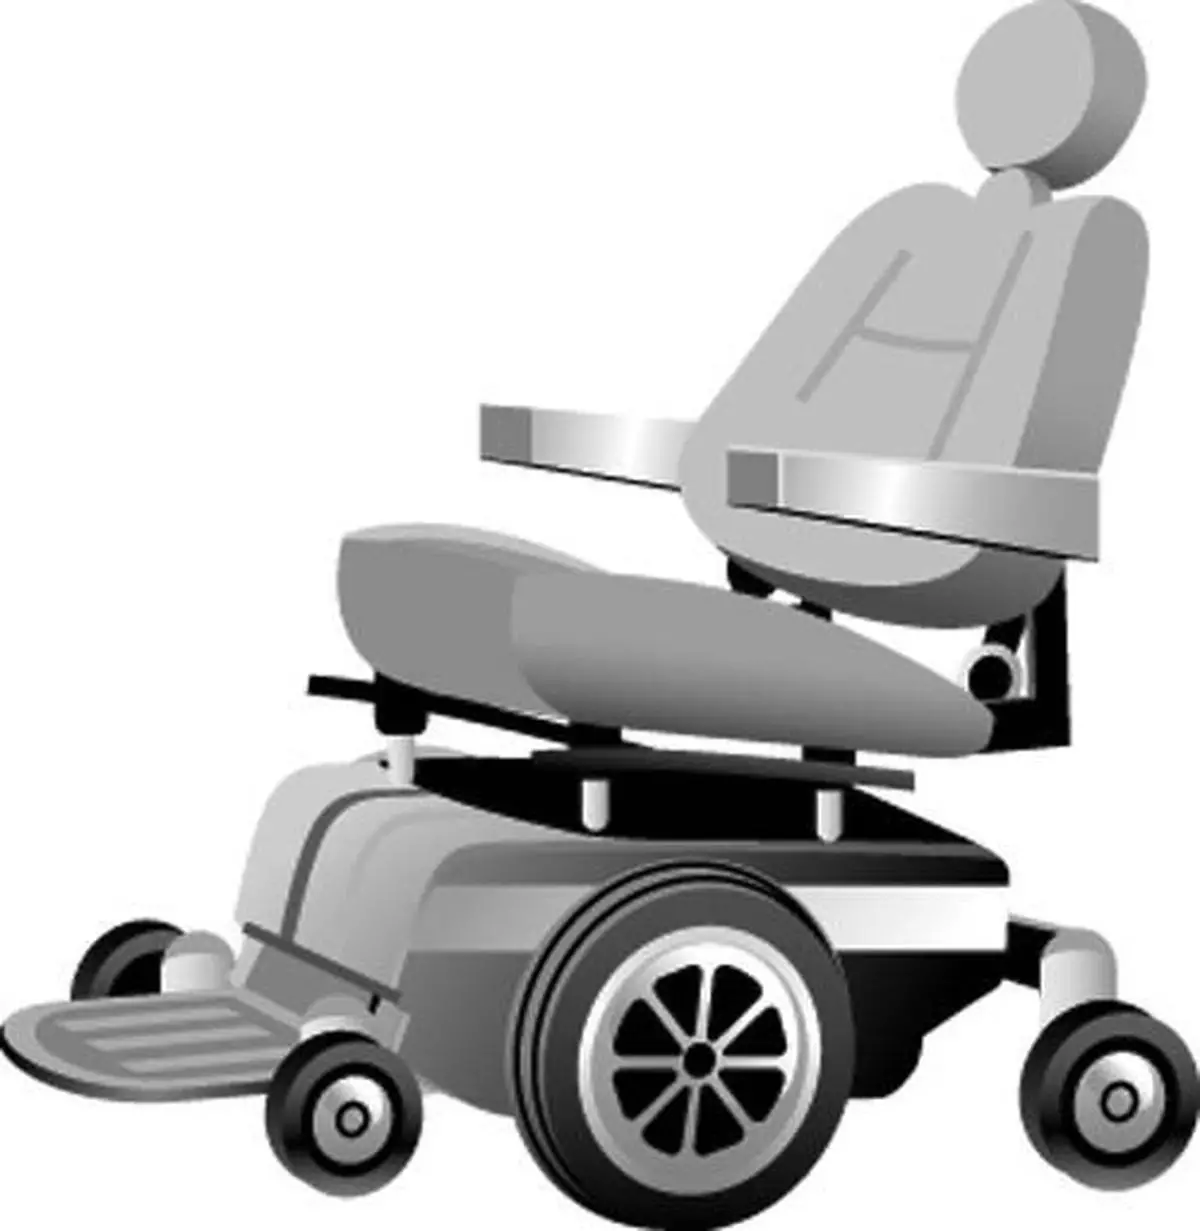 Does Medicare Pay For Wheelchair Lifts For Vehicles